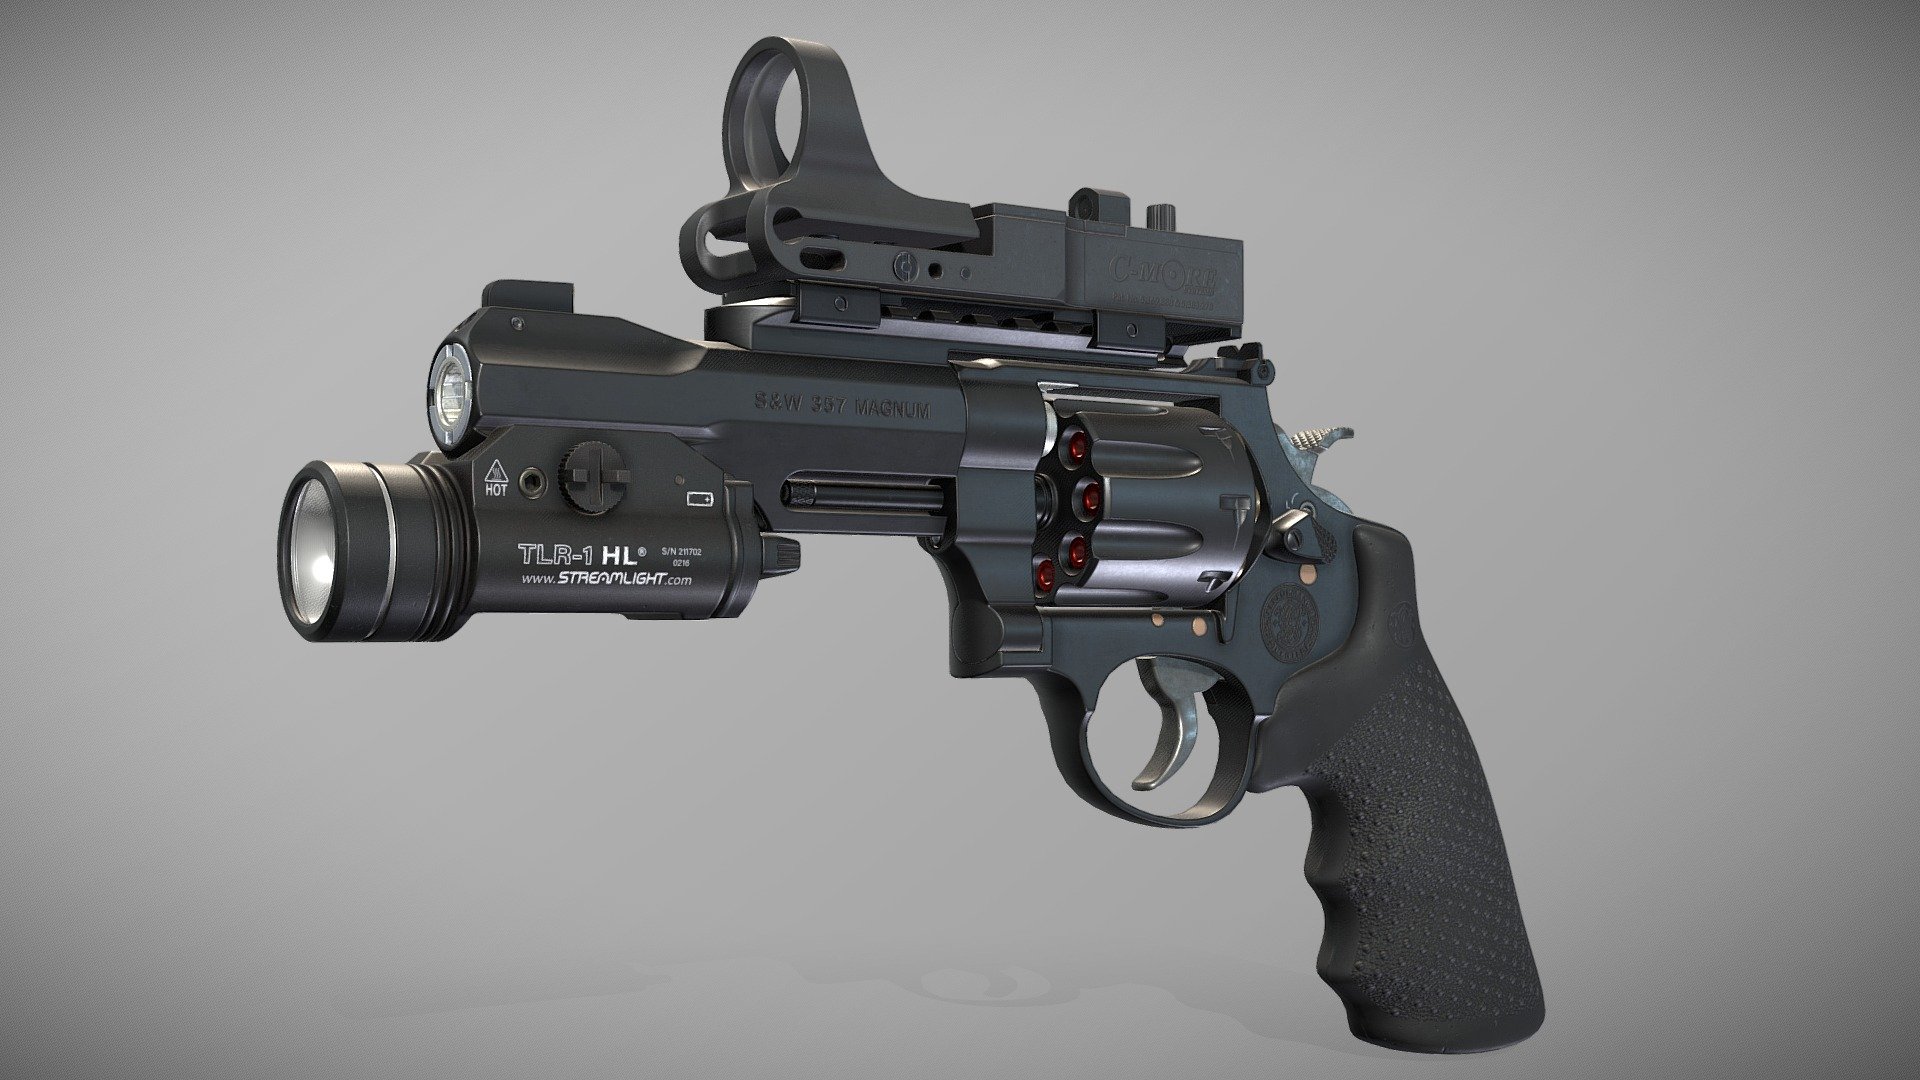 This is a model of a M&amp;P R8 Smith &amp; Wesson revolver with attachements. It doesn’t match the reference perfectly, but I really enjoyed modeling it. Hope you like it! You can write what you think in the comments - I really appreciate the feedback.

FREE to use with your projects. Commercial use is OK, but remember that all trademarks belong to their owners. If you need source files, you can take the archive at artstation - https://www.artstation.com/marketplace/p/7edVd/mp-r8-smith-wesson-source 3d model